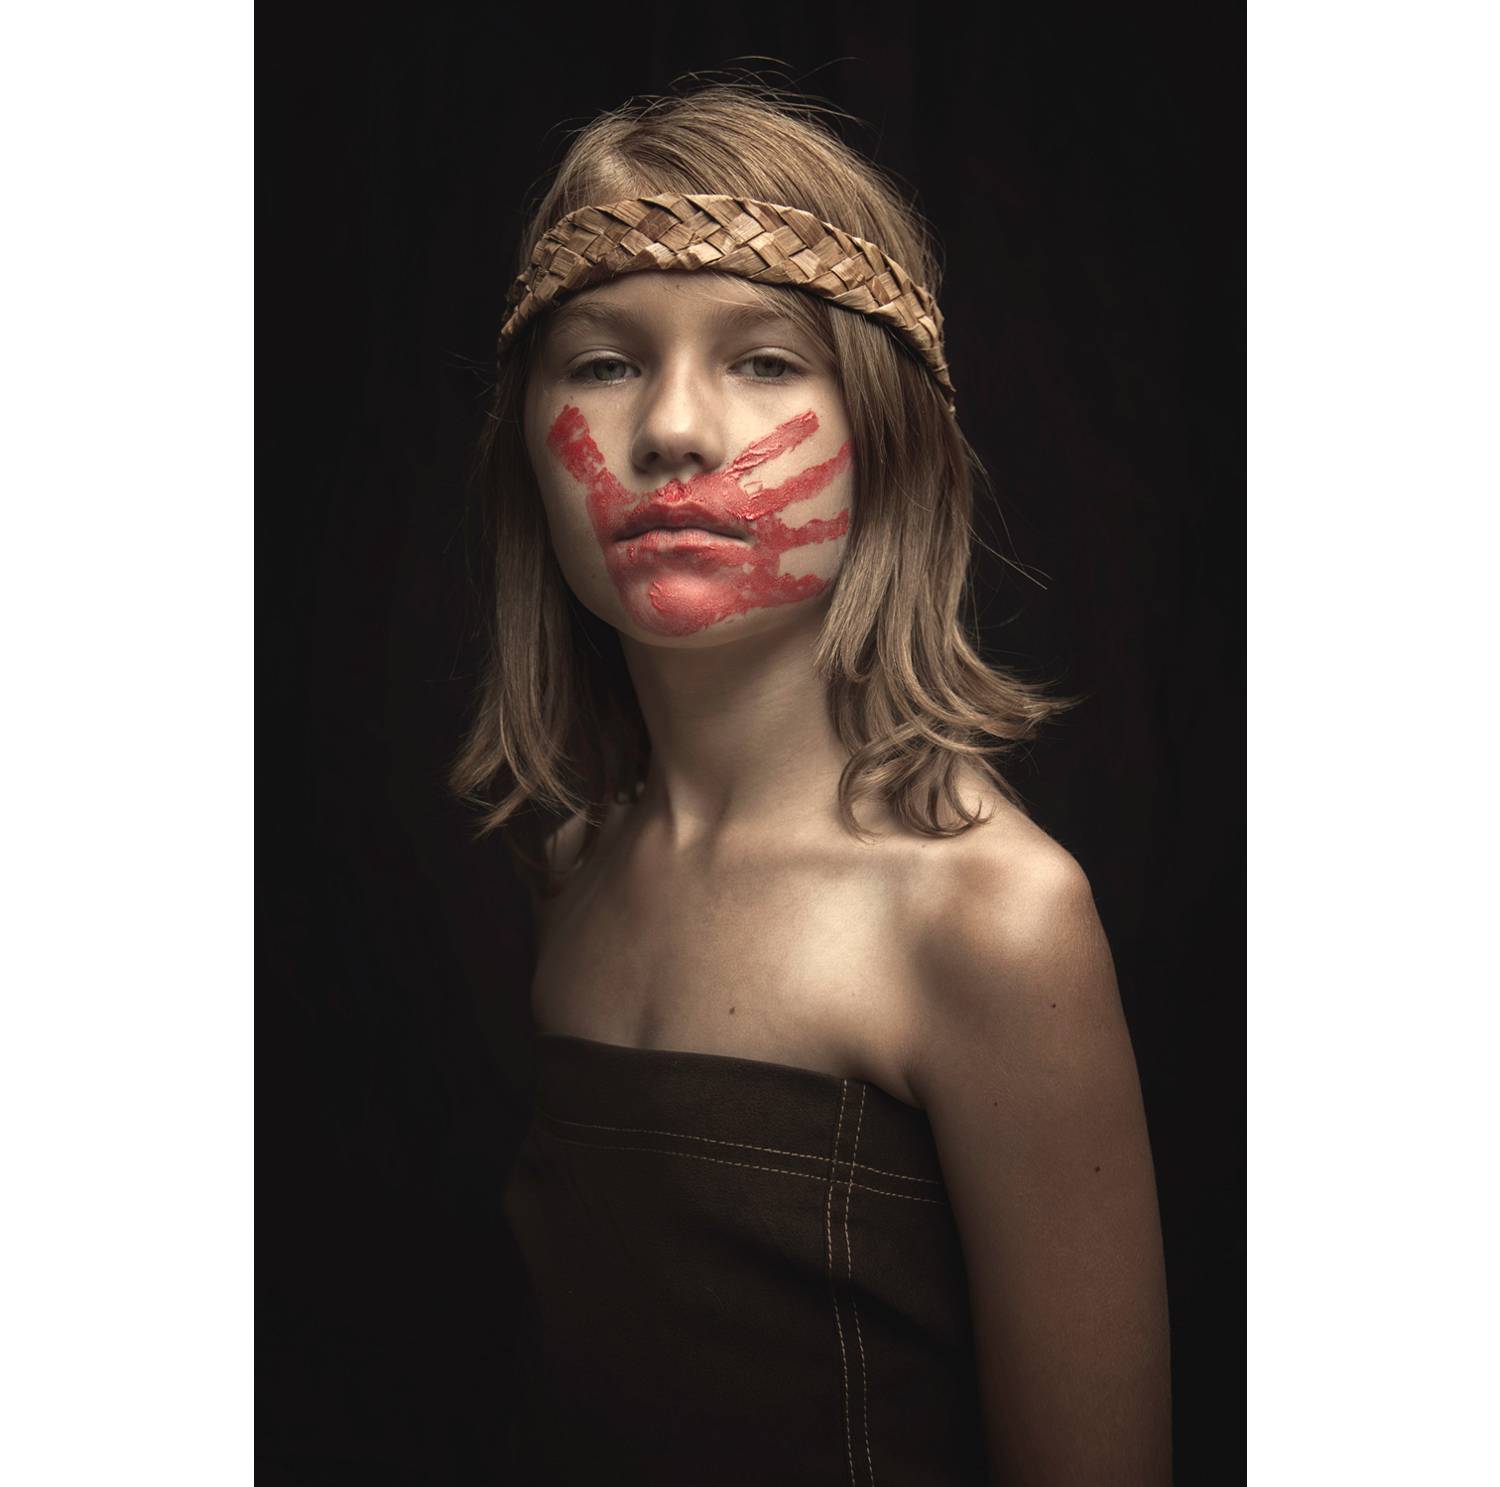 Nolan Streitberger photographs his daughter Haley, a member of the Cowlitz tribe, wearing the red handprint across her mouth that symbolizes the deaths of more than 500 Native women and girls.